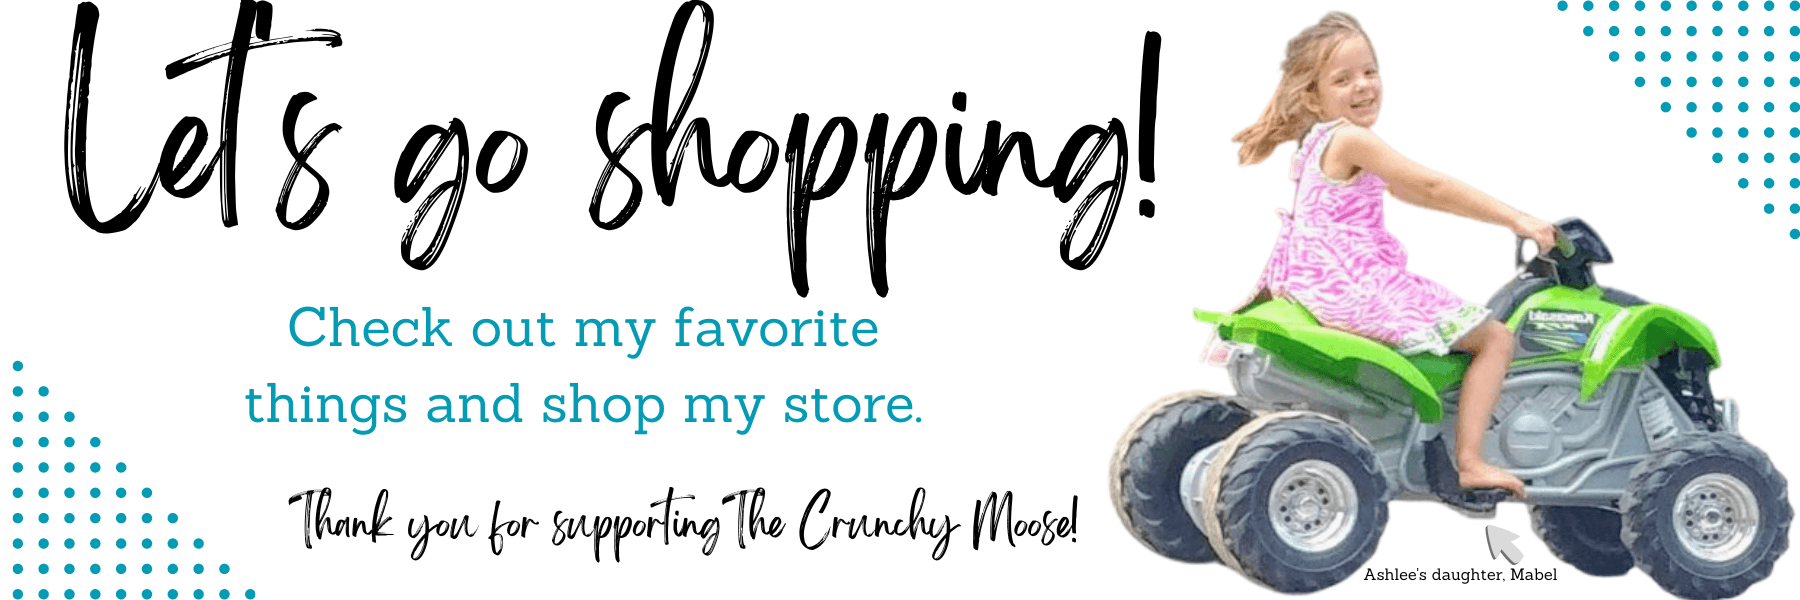 shop my favorite products with The Crunchy Moose